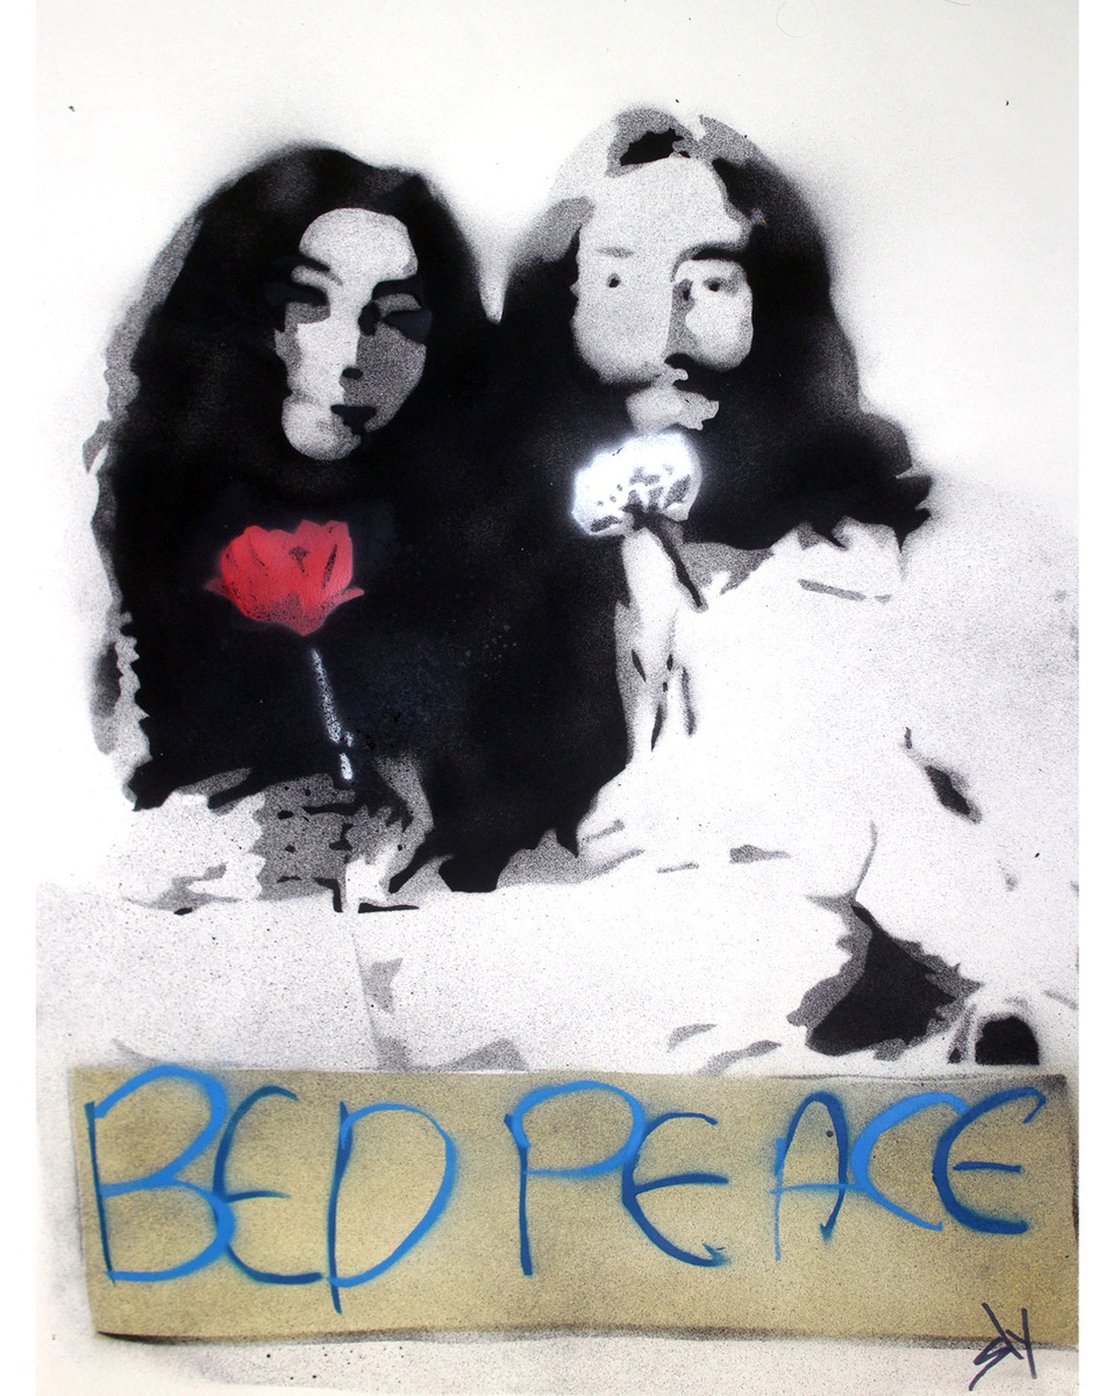 Popiconic moment No. 6: Bed peace (on canvas). Painting by Juan Sly